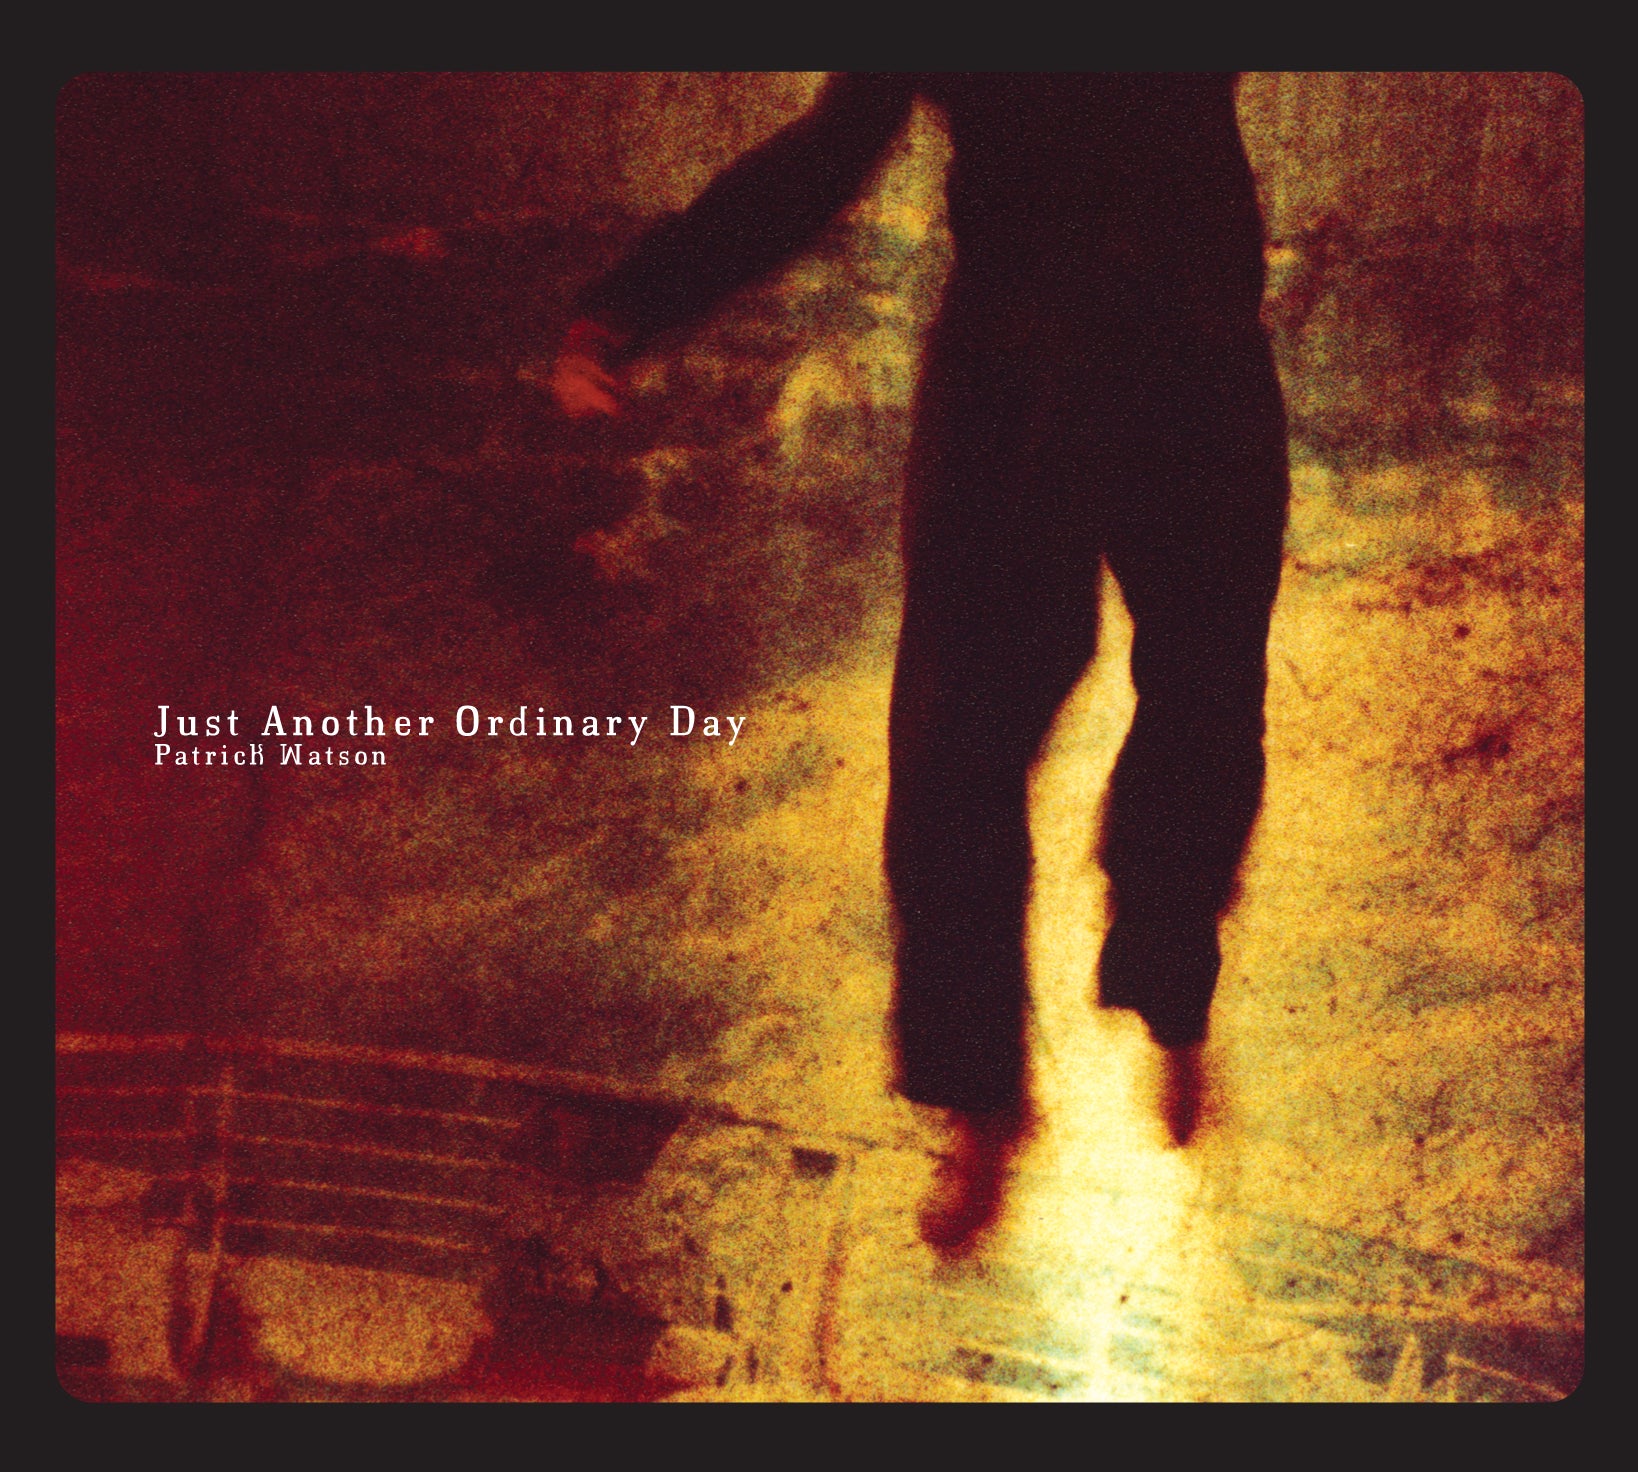 Download - Just Another Ordinary Day